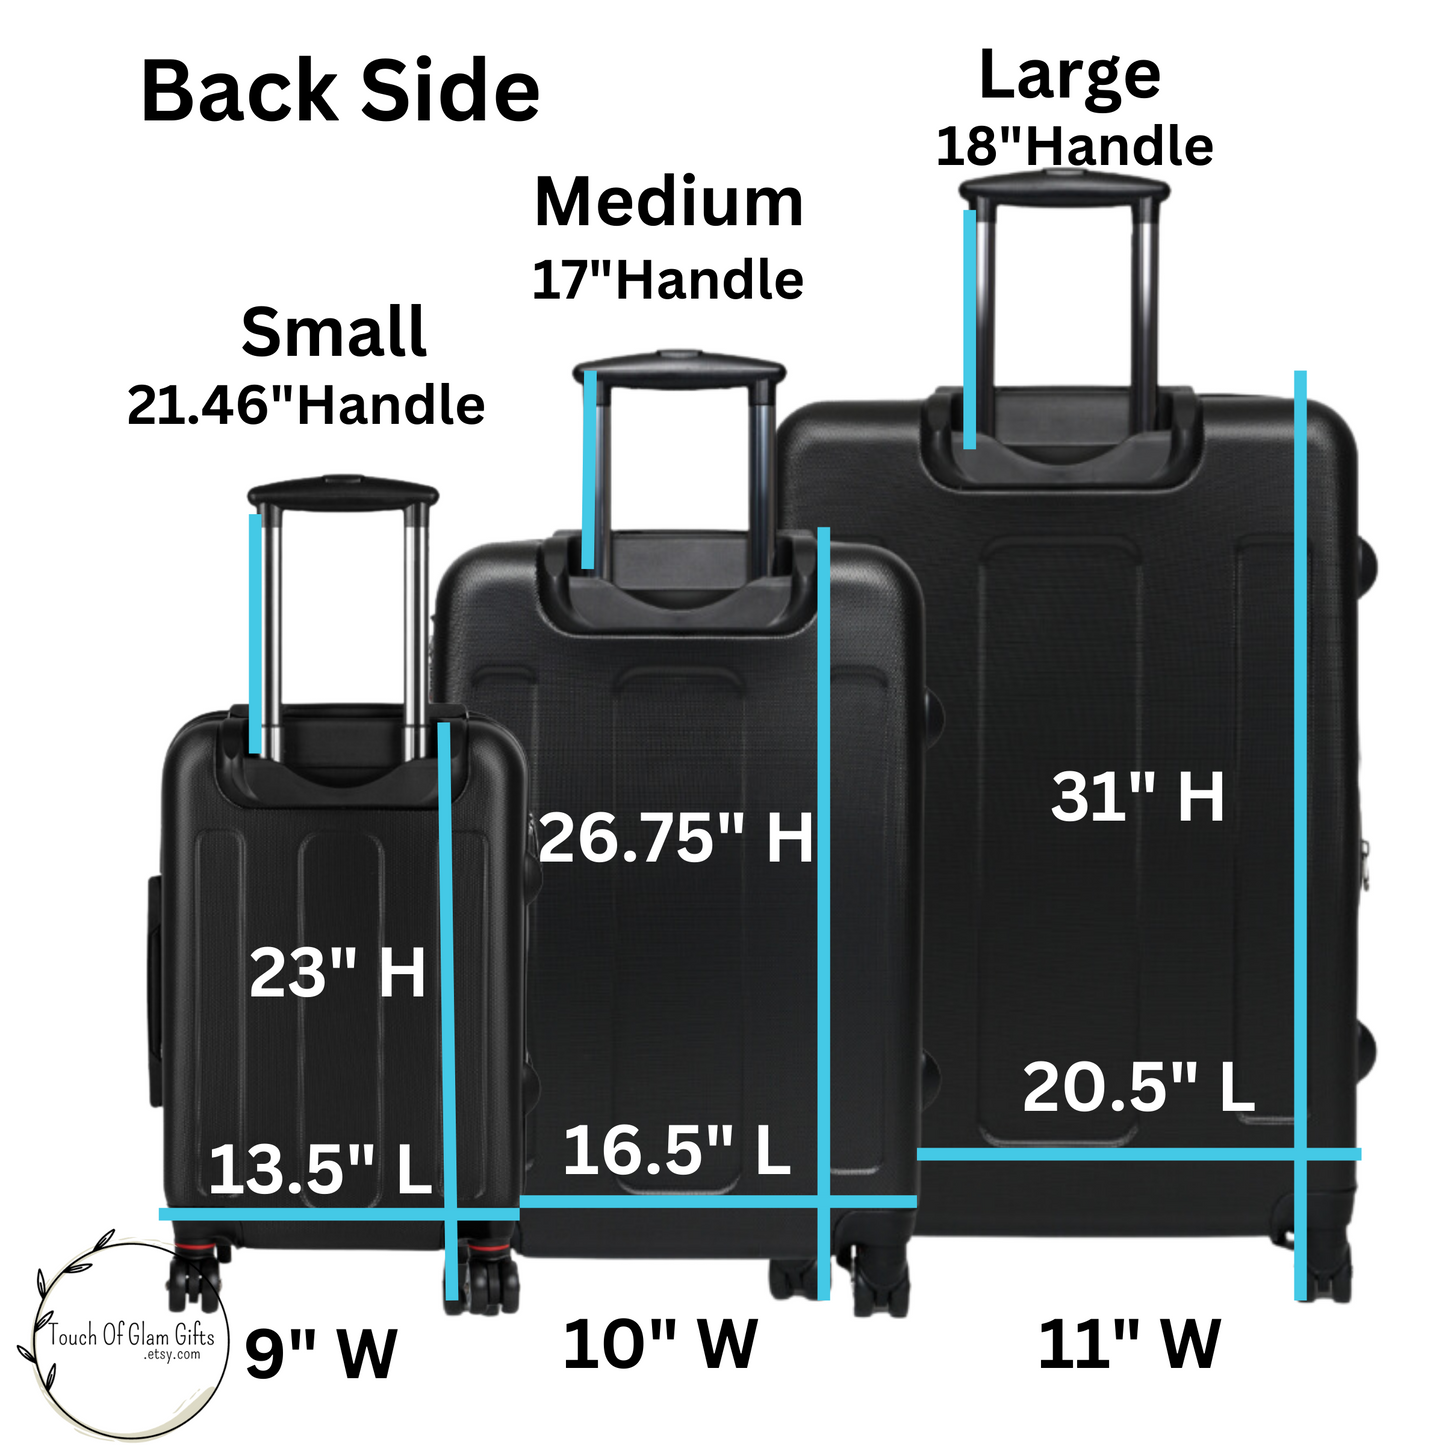 The back side of our luggage is black and this shows the sizes of each of the three sizes.